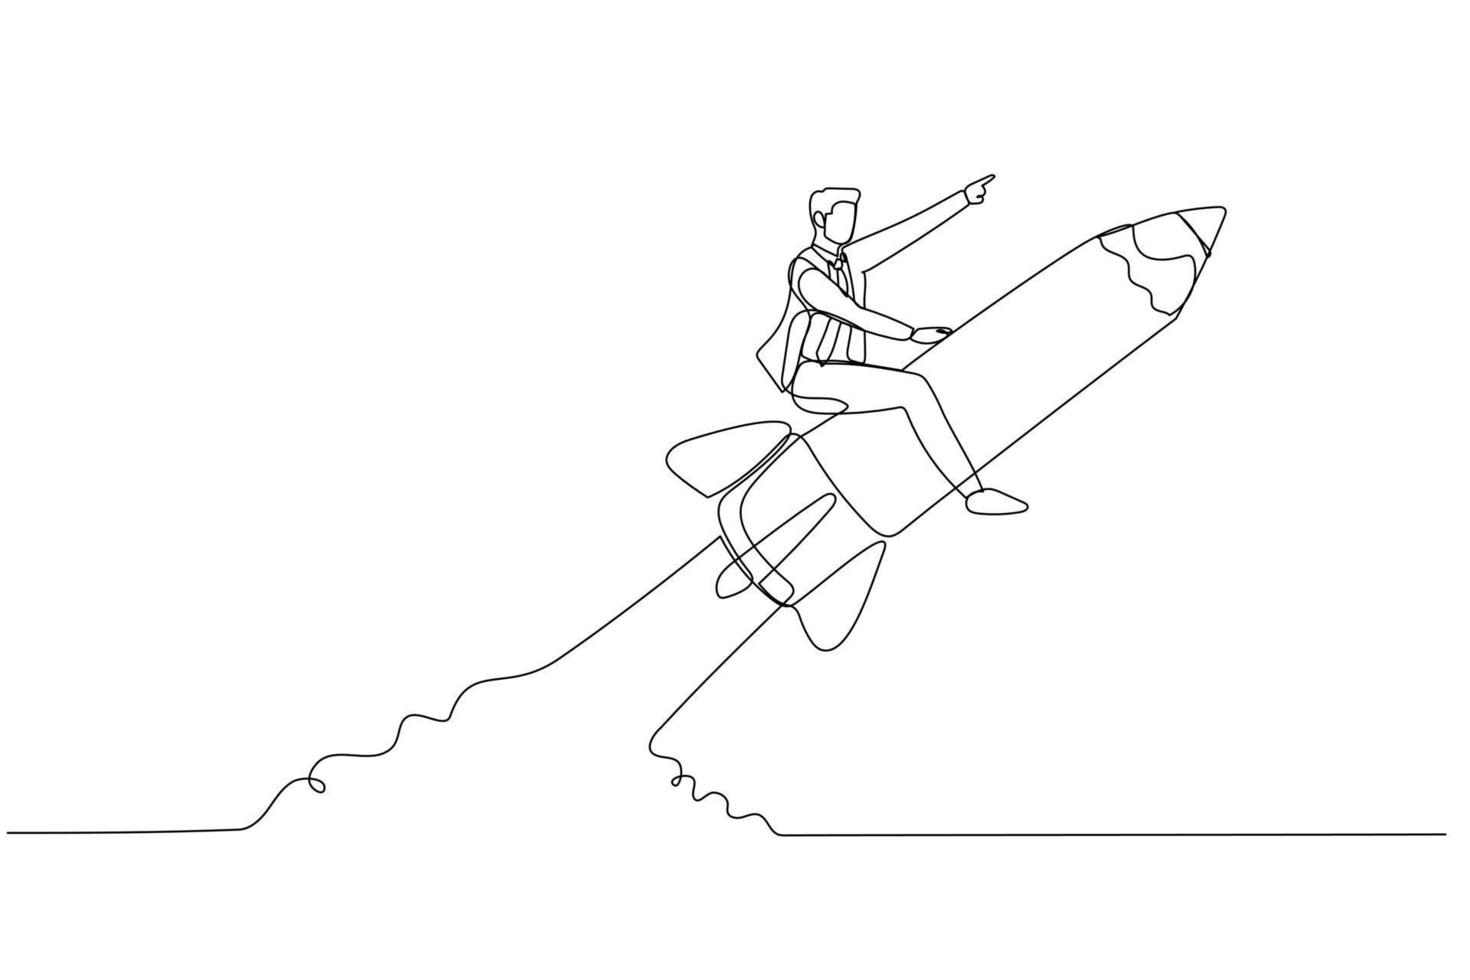 Drawing of businessman riding pencil rocket flying in the sky concept of education. Continuous line art style vector